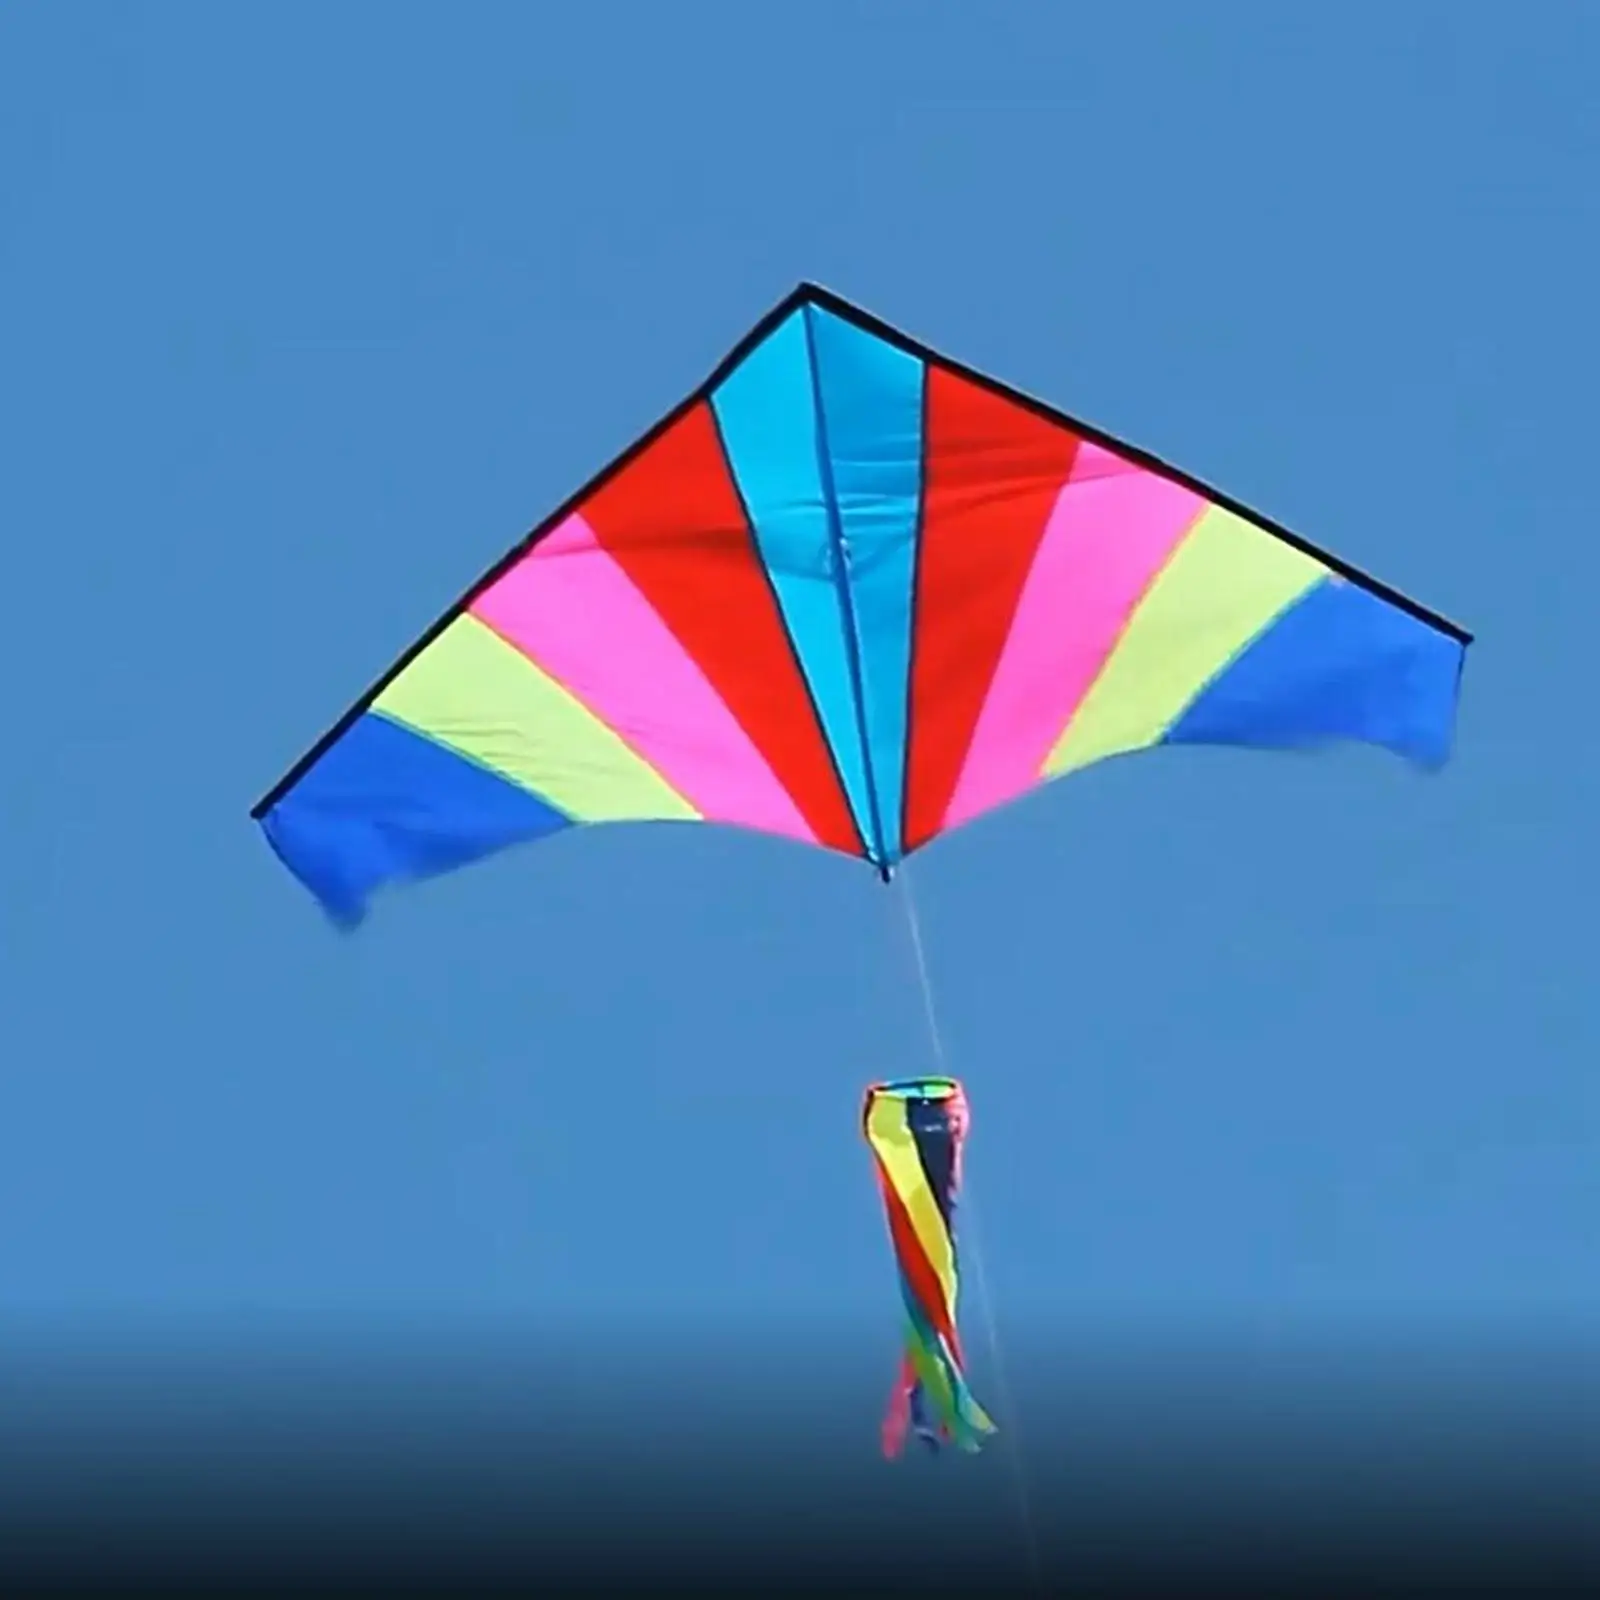 Giant Delta Kite Triangle Kite with Tail Single Line Windsock Vivid for Beach Games Teenagers